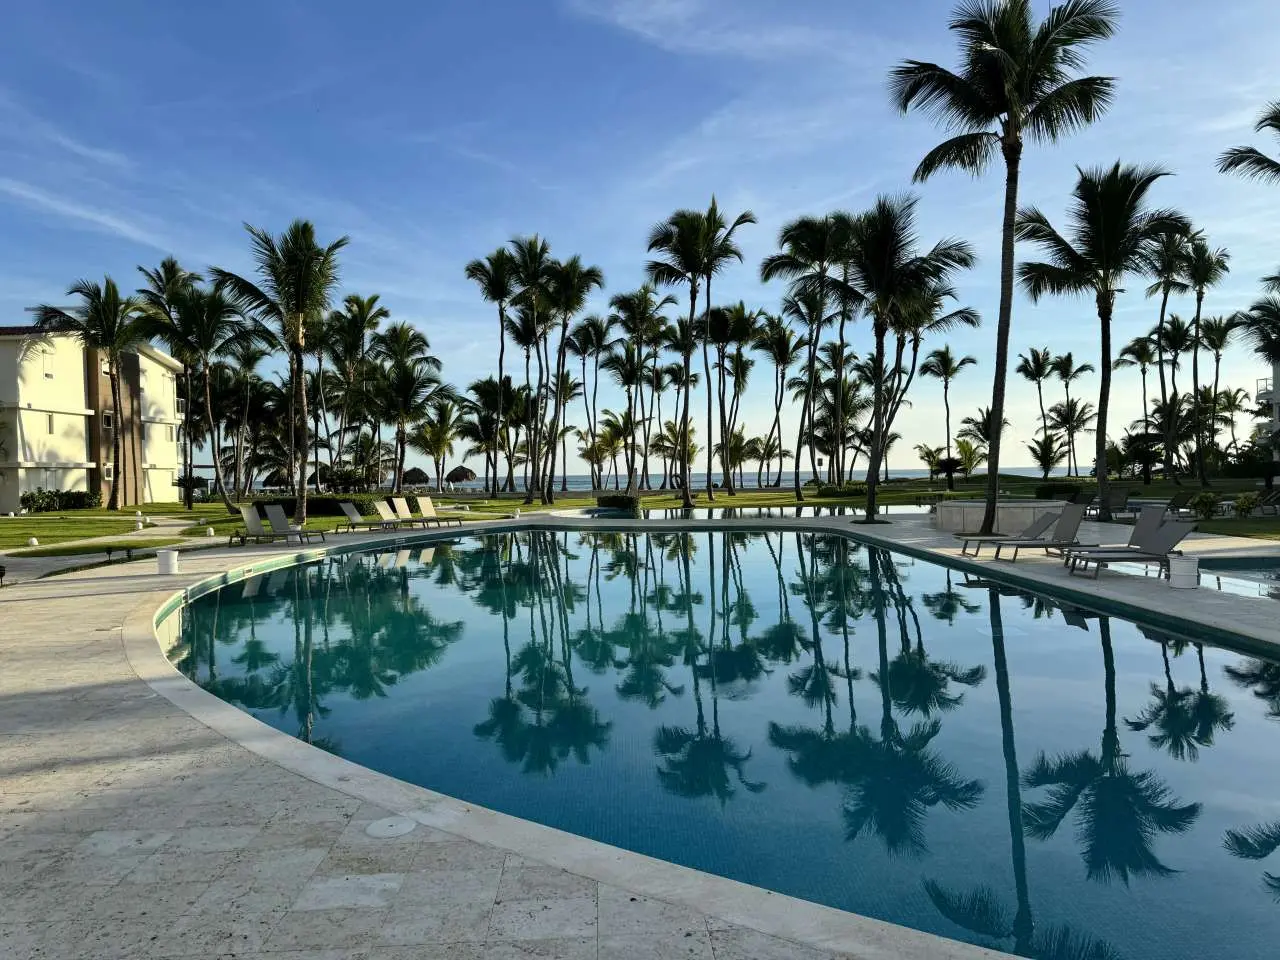 View from Ocean View Apartments overlooking the pool, palm trees reflected in the water surface and private beach